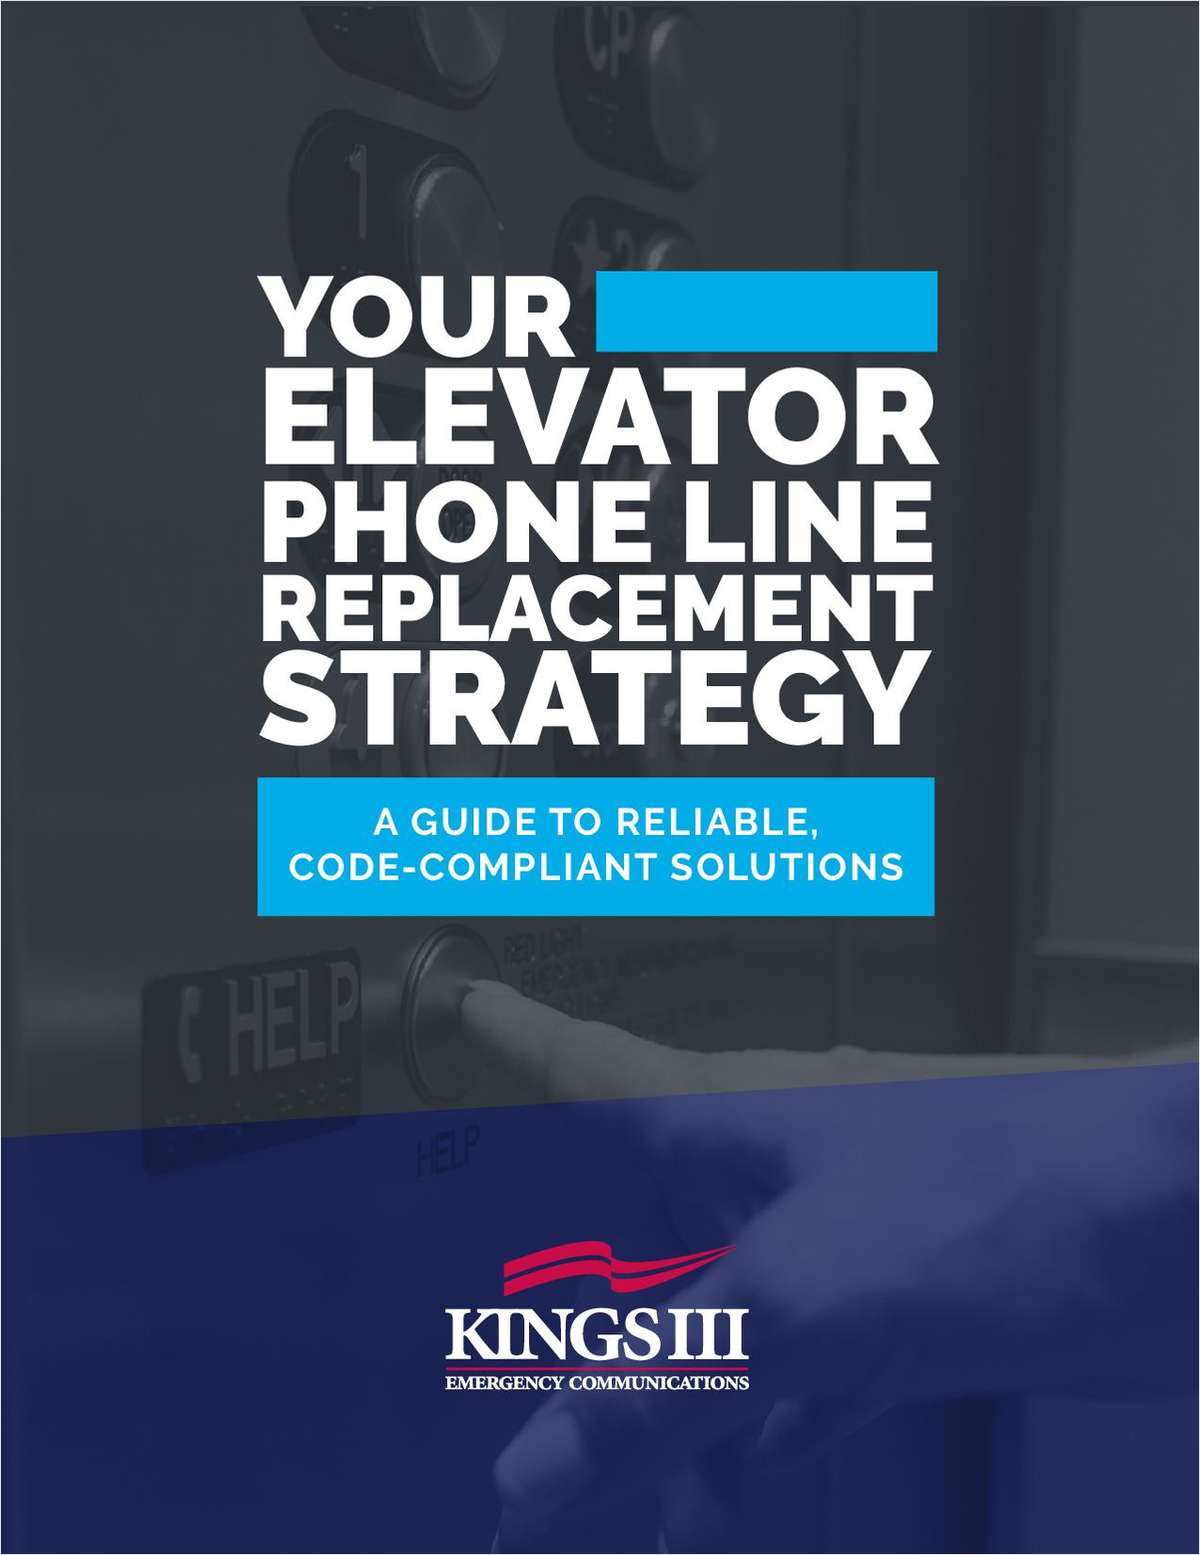 Elevator Phone Line Replacement Strategy | A Guide to Reliable, Code-Compliant Solutions